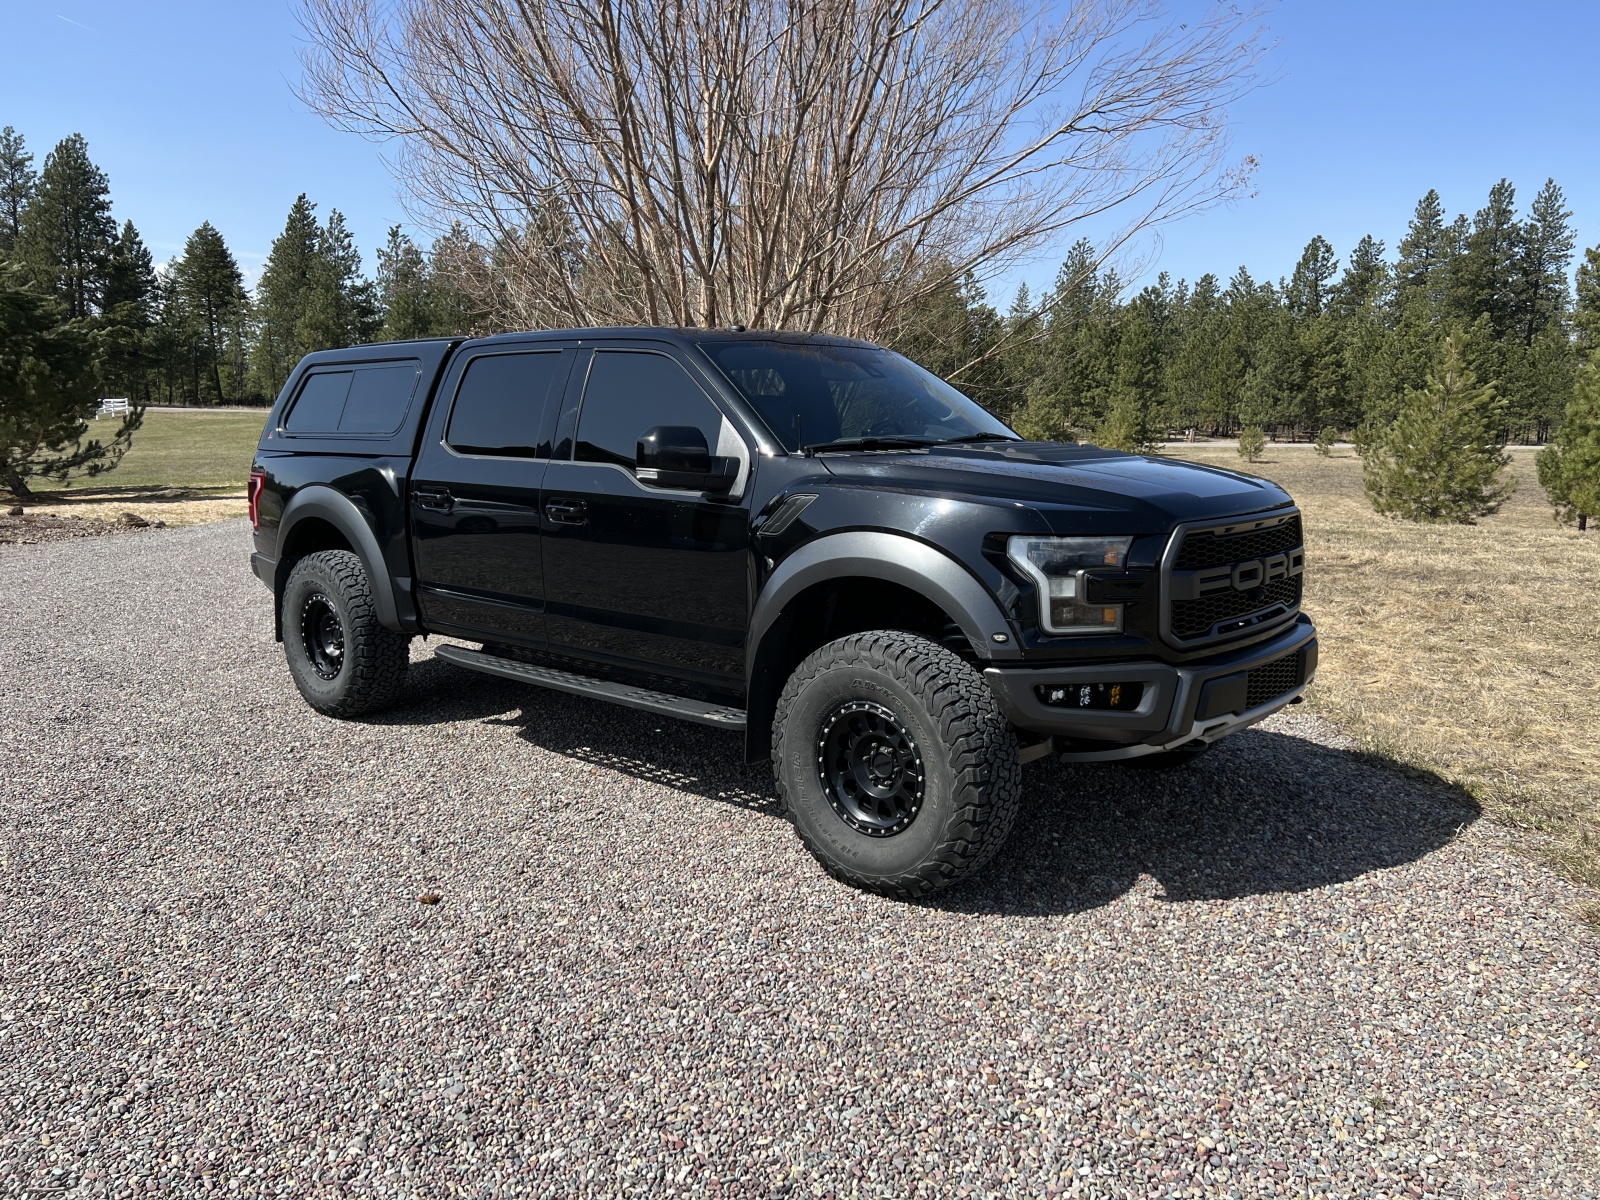 For Sale: 2018 F150 Raptor on 37's - photo1